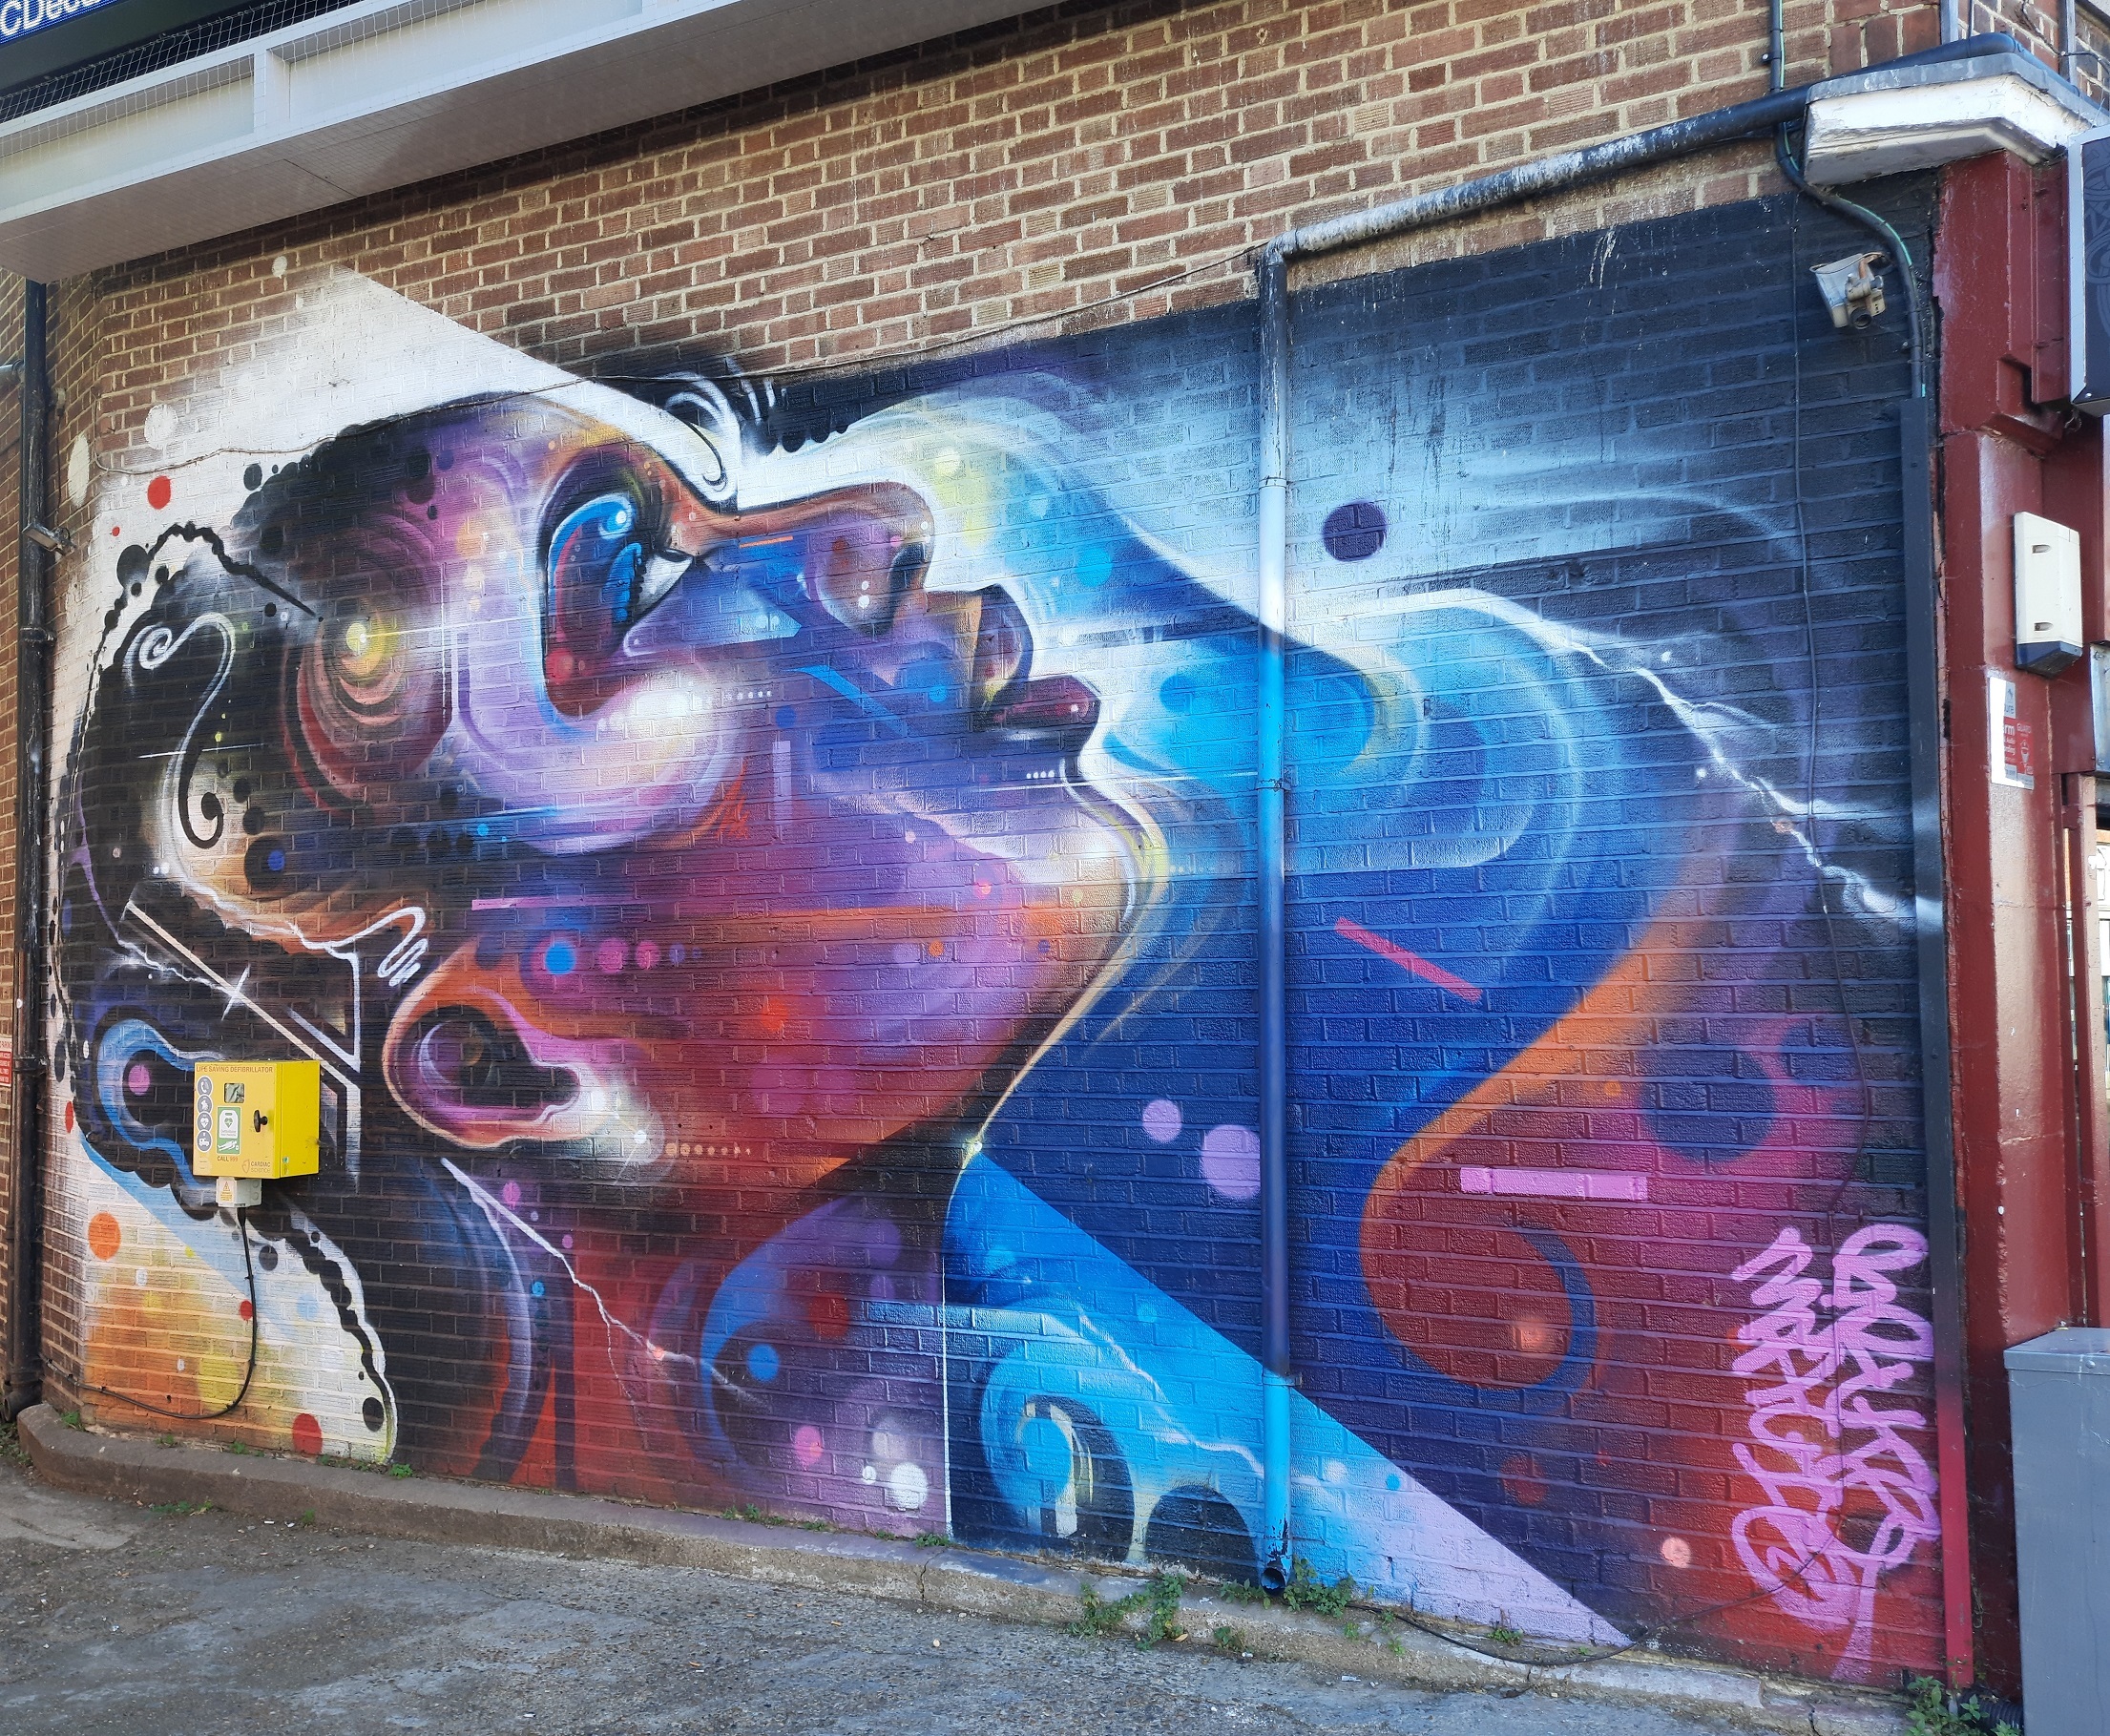 Graffiti 6562  by the artist Mr CENZ captured by Mephisroth in London United Kingdom